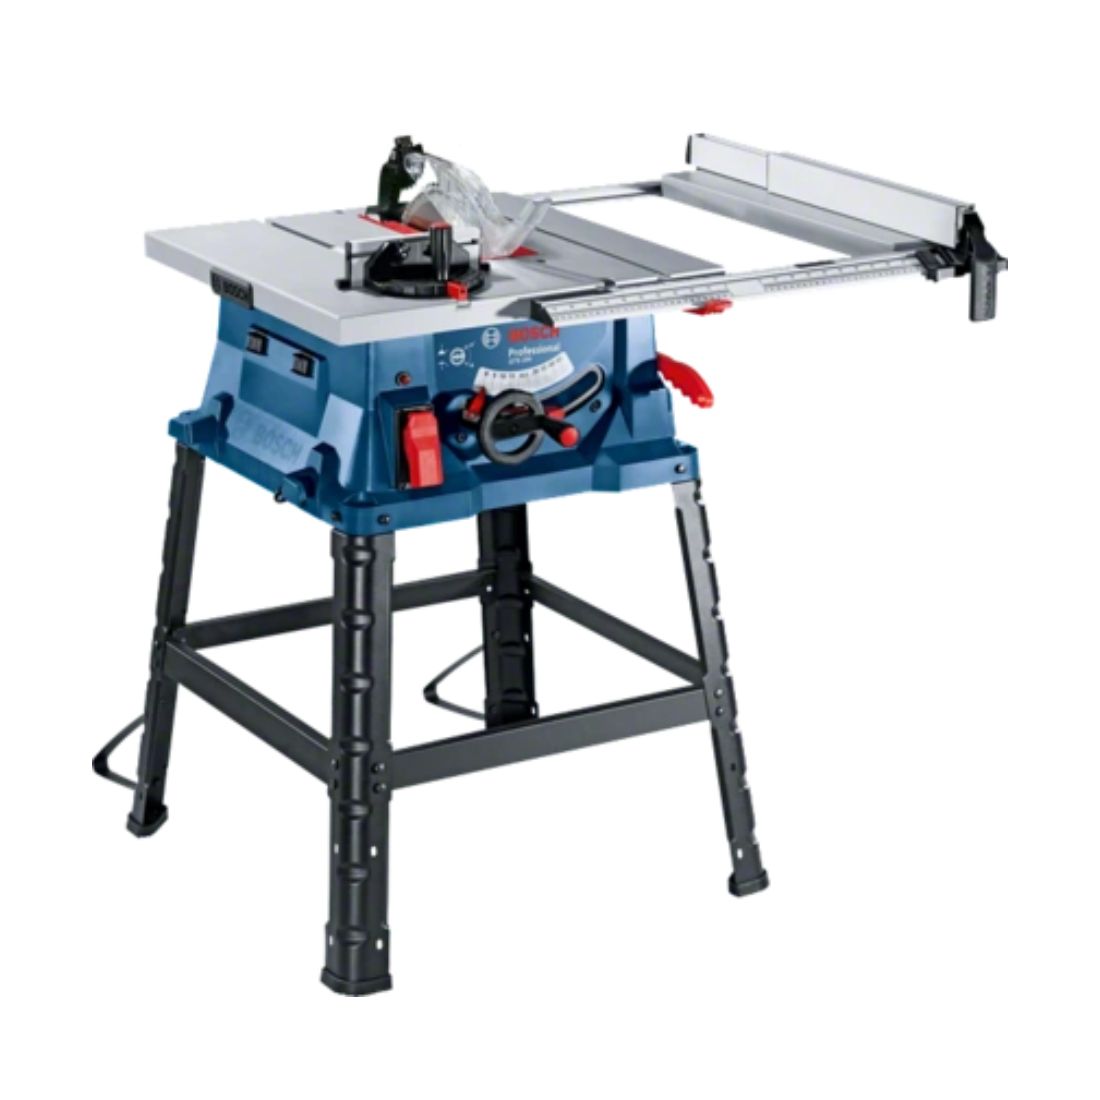 Bosch (GTS 254) Corded Electric Table Saw 1800W, 254 mm Saw Blade Dia, 4,300 rpm